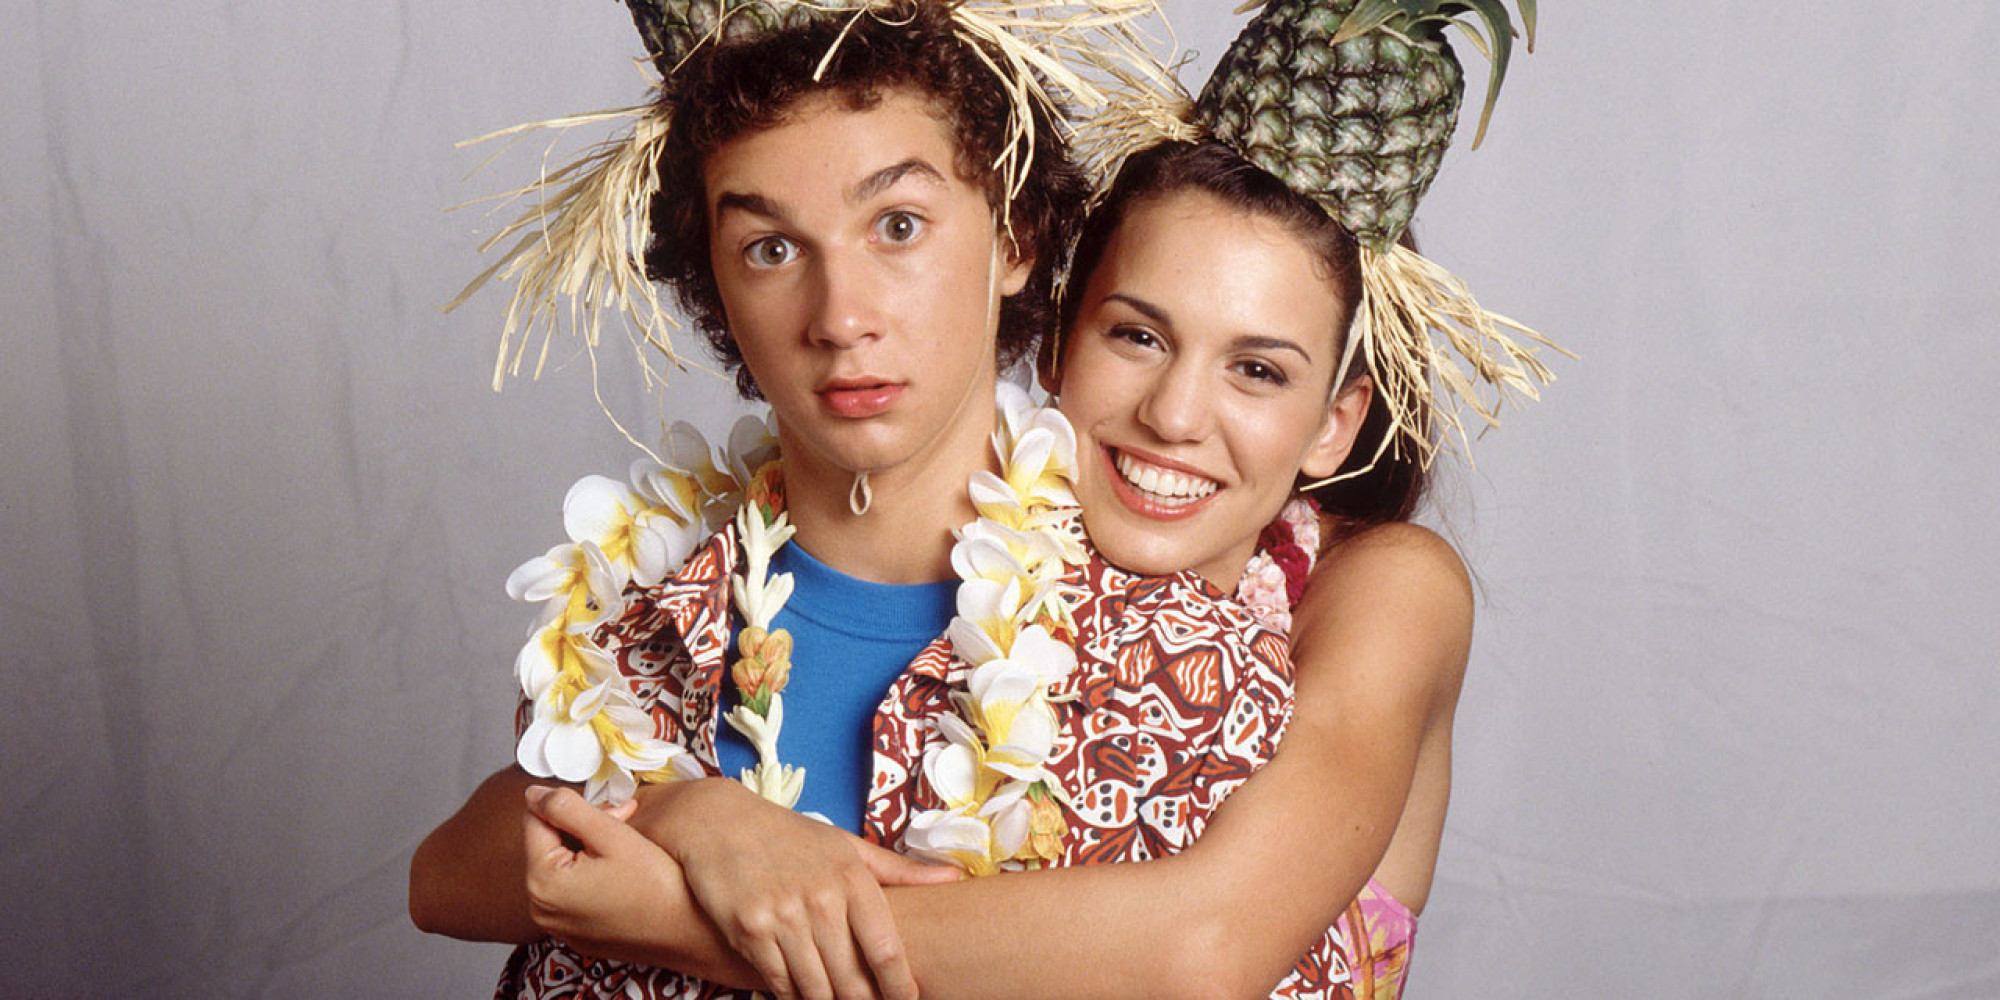 Shia LaBeouf May Plagiarize, But His TV Sister Still Has His Back | HuffPost2000 x 1000